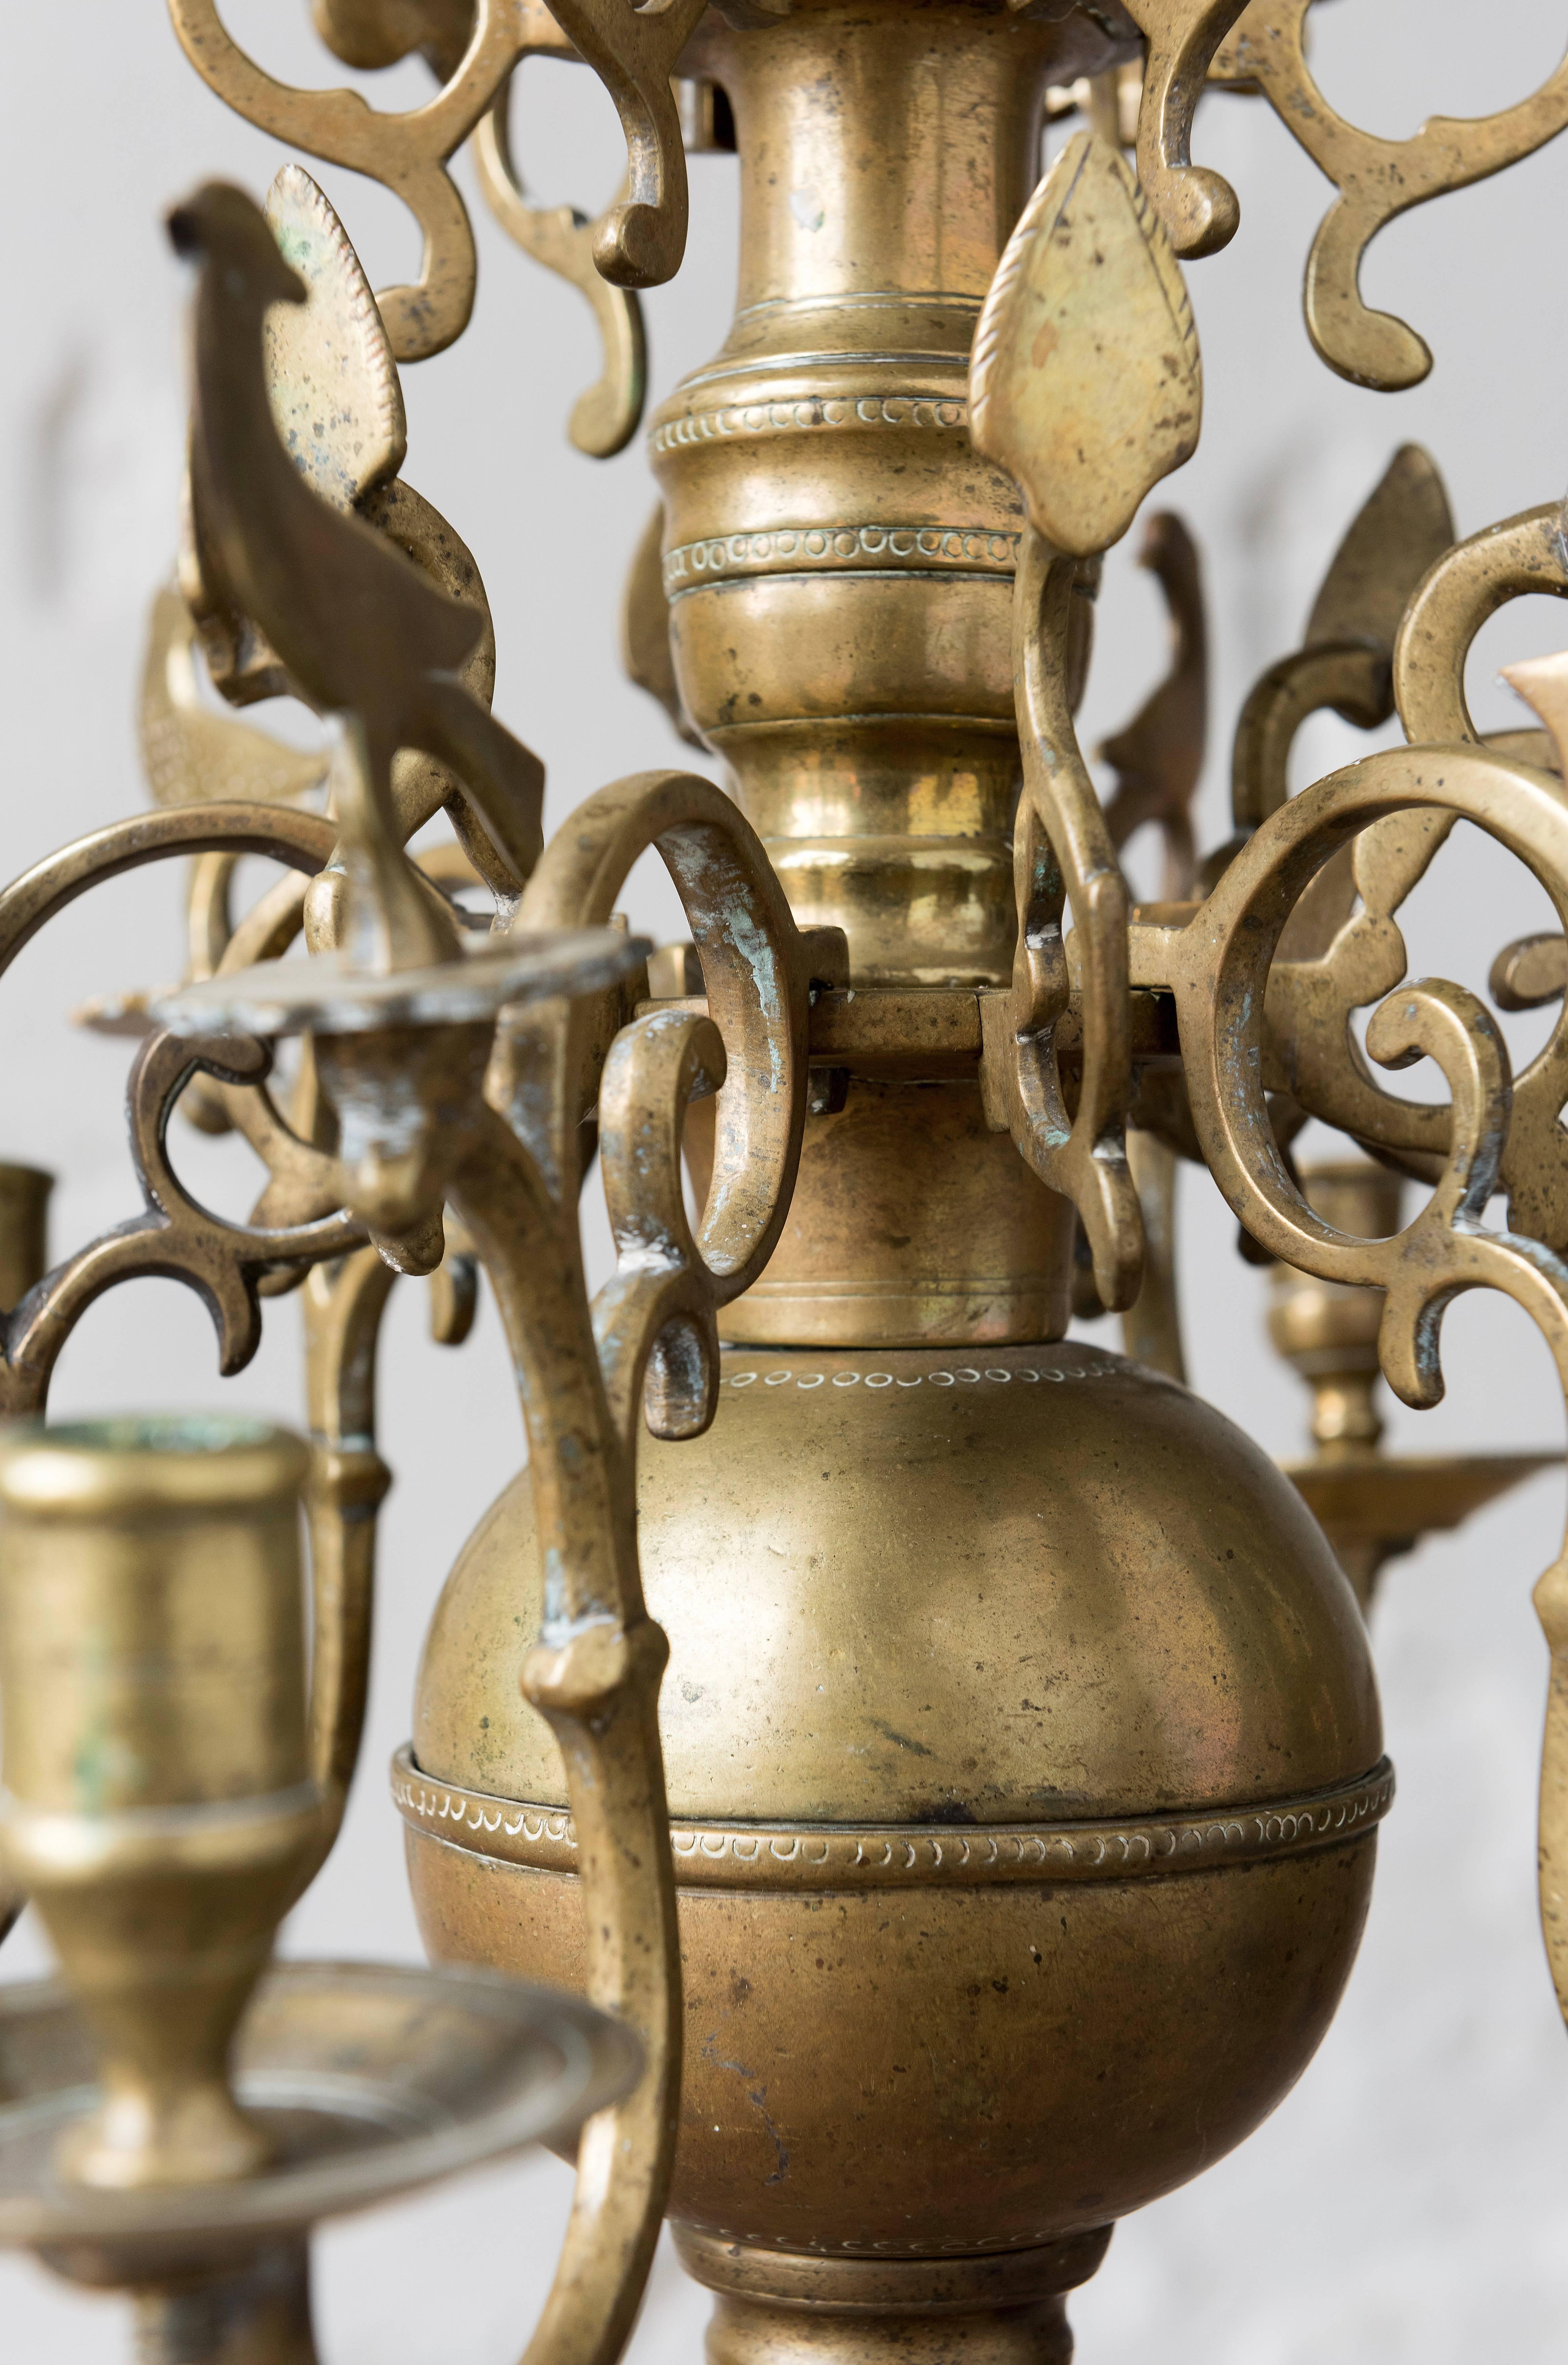 17th century Netherland or German six-light brass chandelier
Brass Baroque six-light chandelier cast and worked in 17th century.
Holes on body made later for electricity wiring
Otherwise in original untouched condition.
  